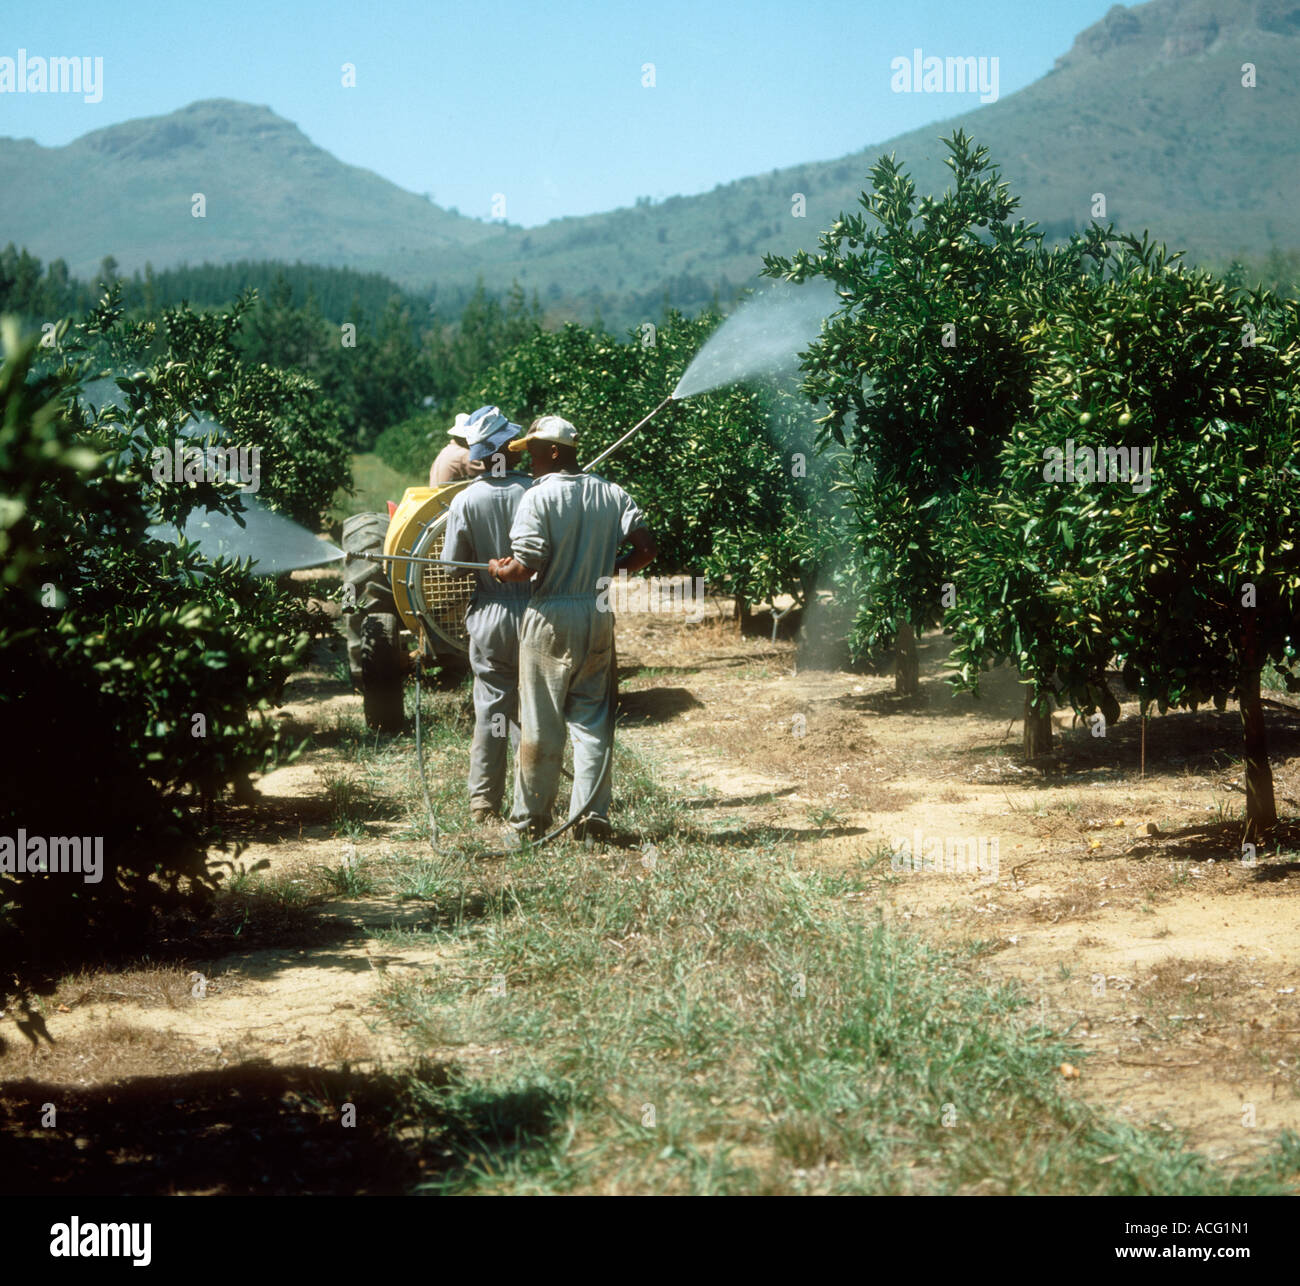 Lance spraying of orange trees in South Africa without safety clothing Stock Photo